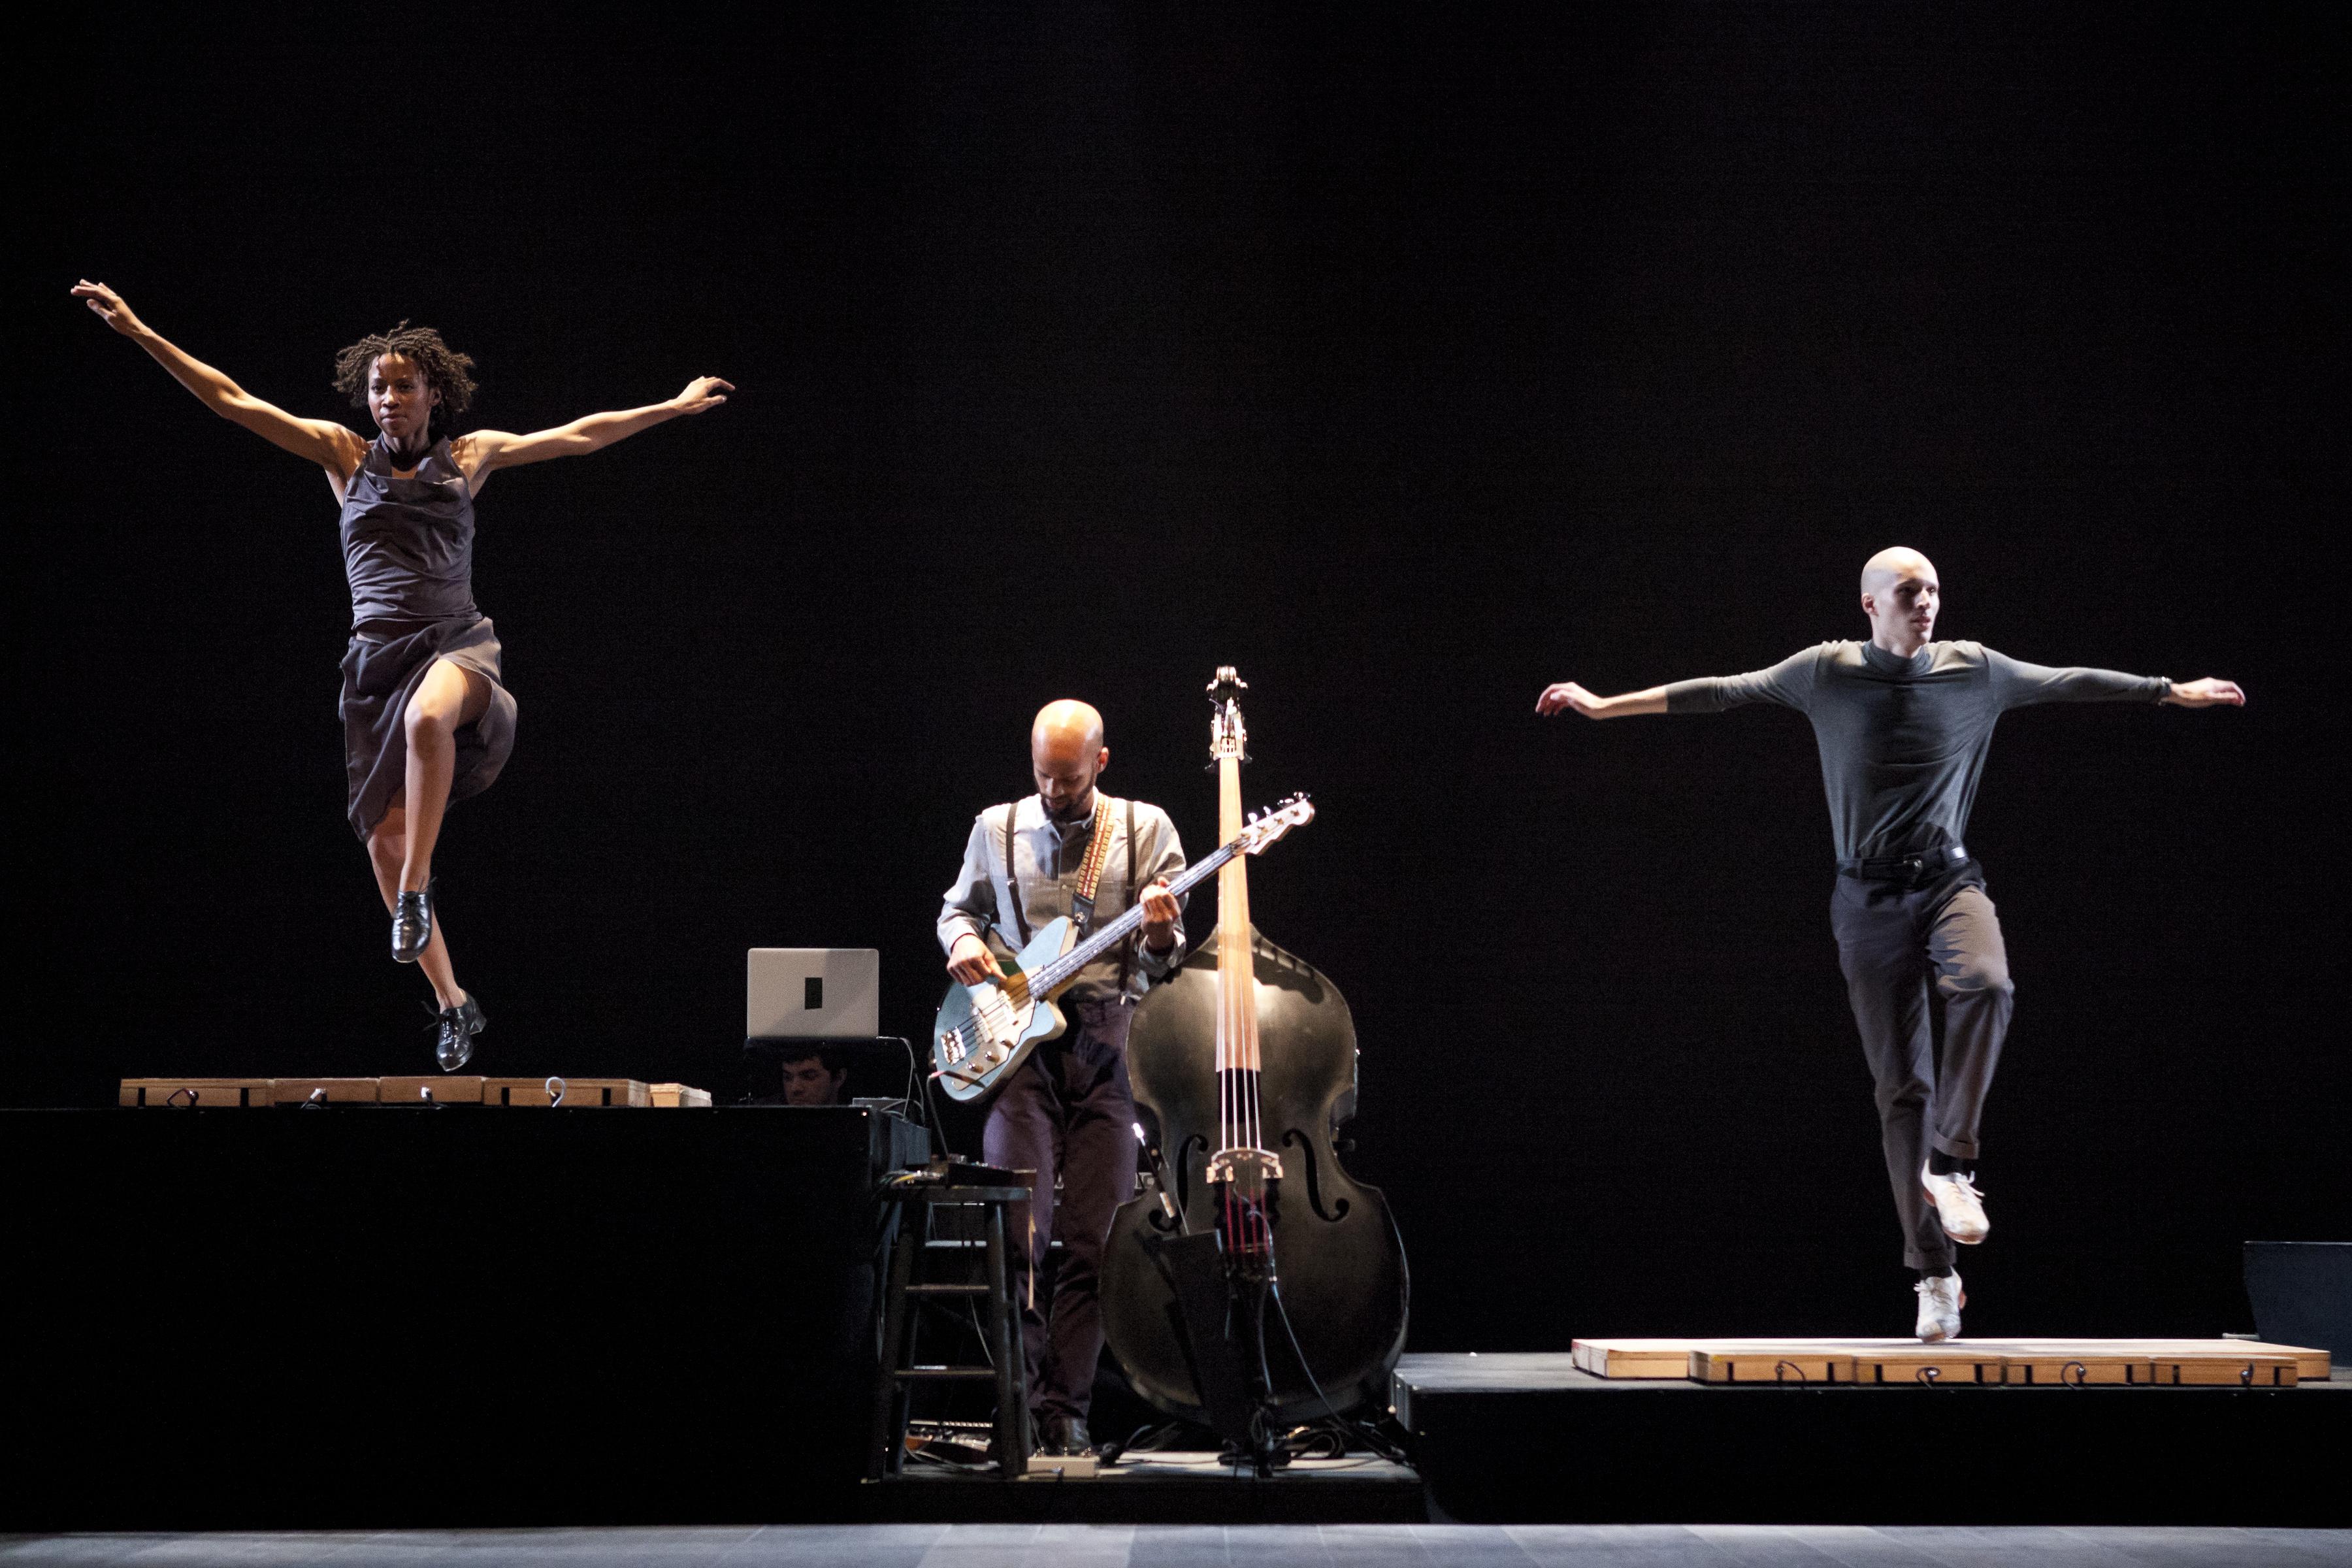 A man playing an electric guitar stands in between two raised platforms, both at different heights; two dancers, arms outstretched, are tapping atop the platforms.